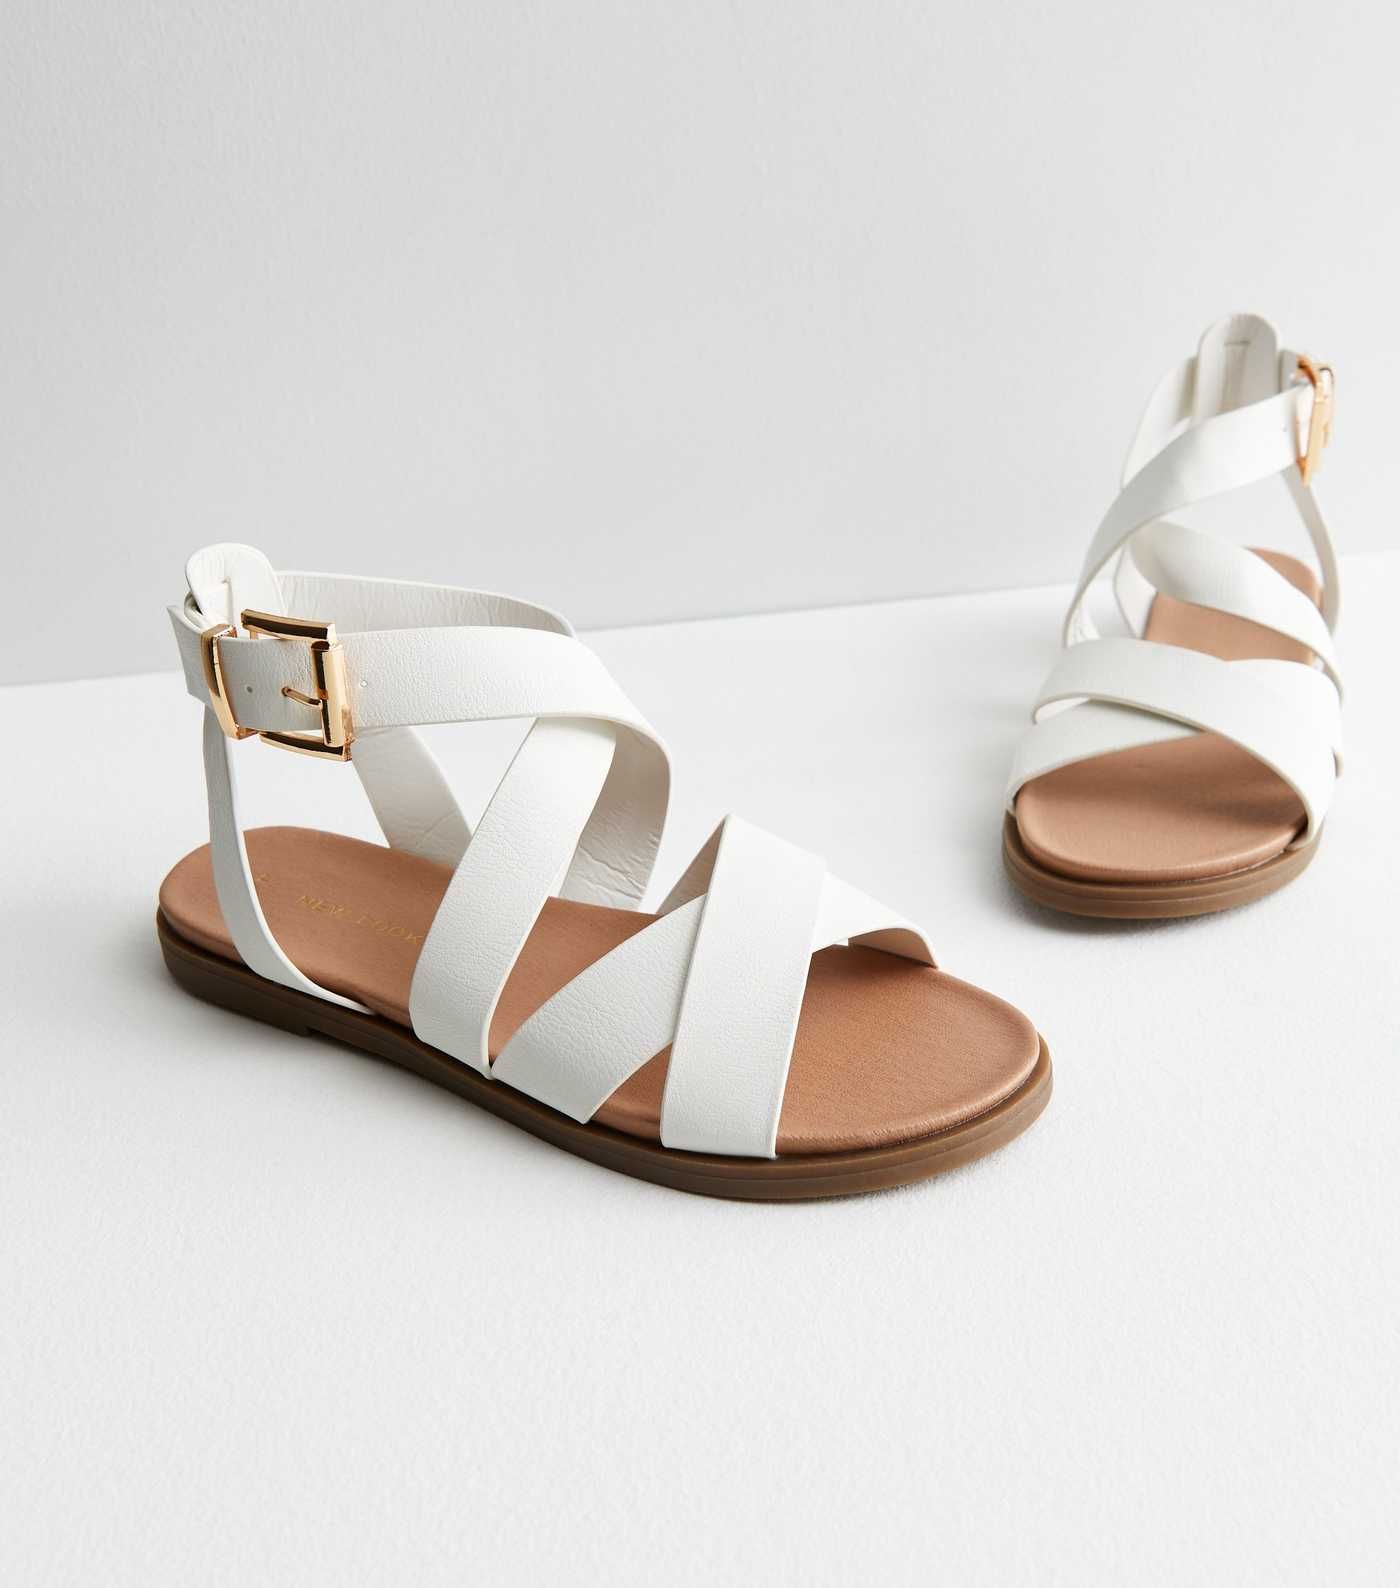 White Leather-Look Strappy Footbed Sandals
						
						Add to Saved Items
						Remove from Save... | New Look (UK)